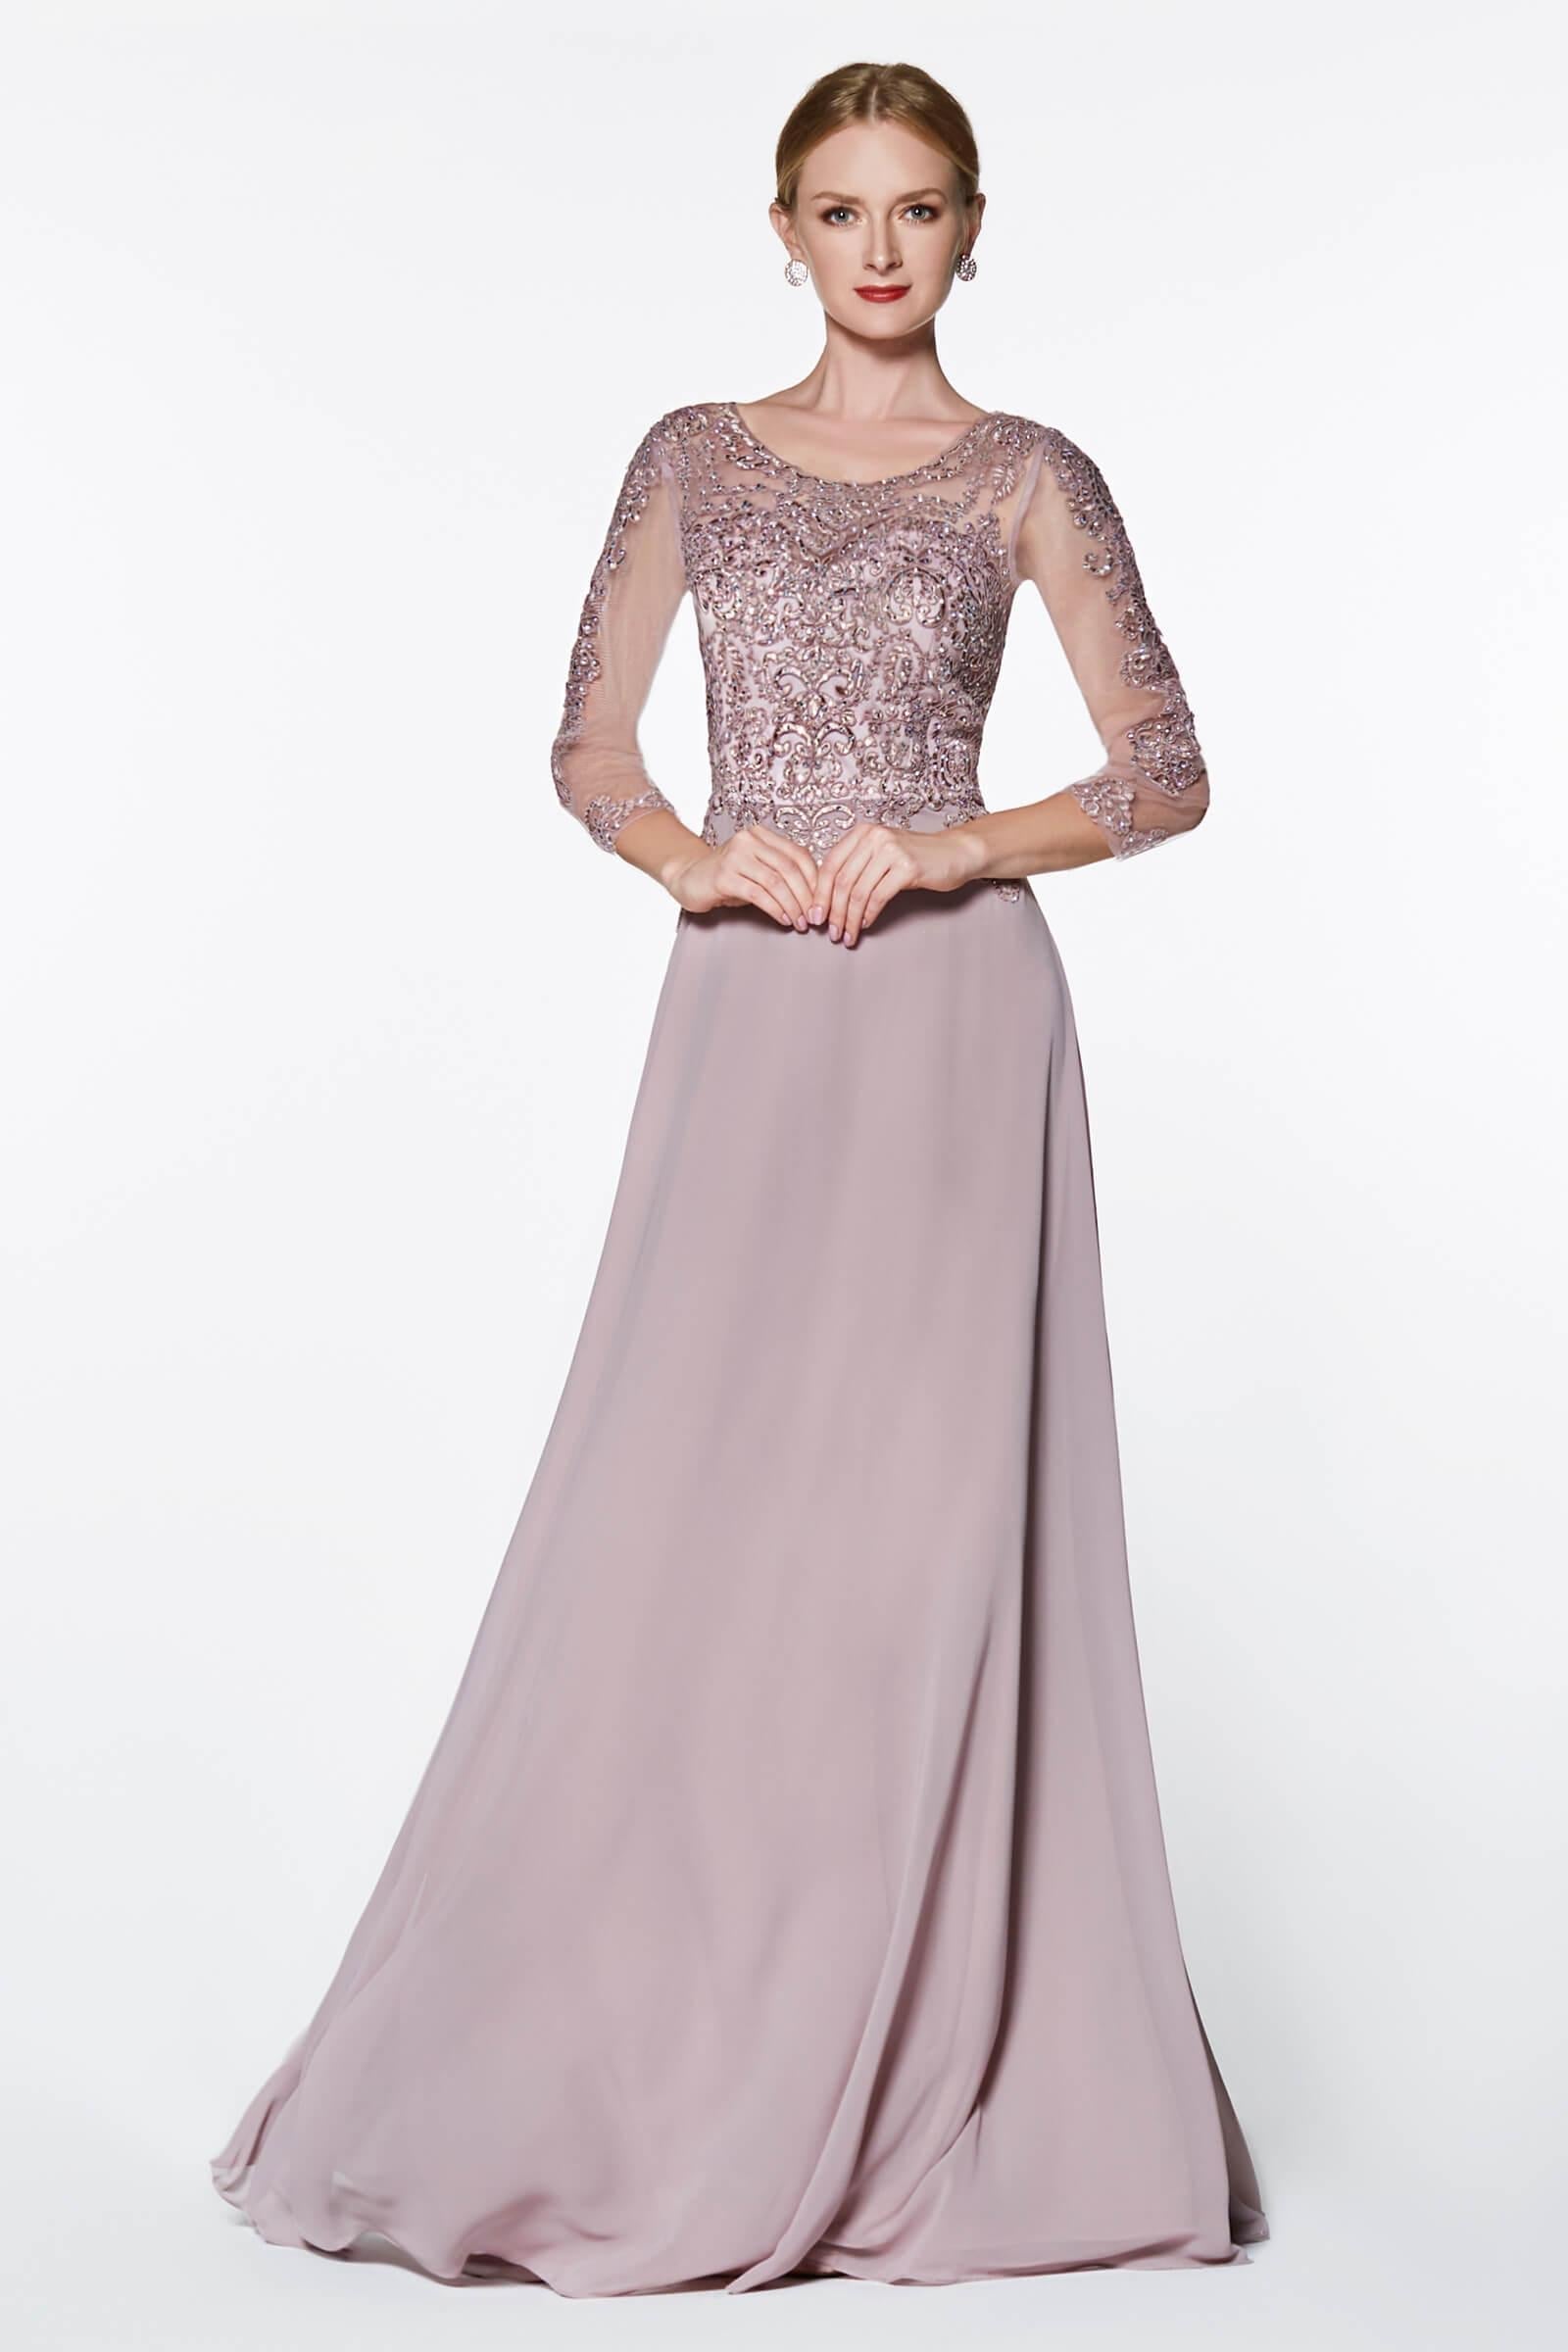 Long Formal Dress Mother of the Bride Gown - The Dress Outlet Cinderella Divine